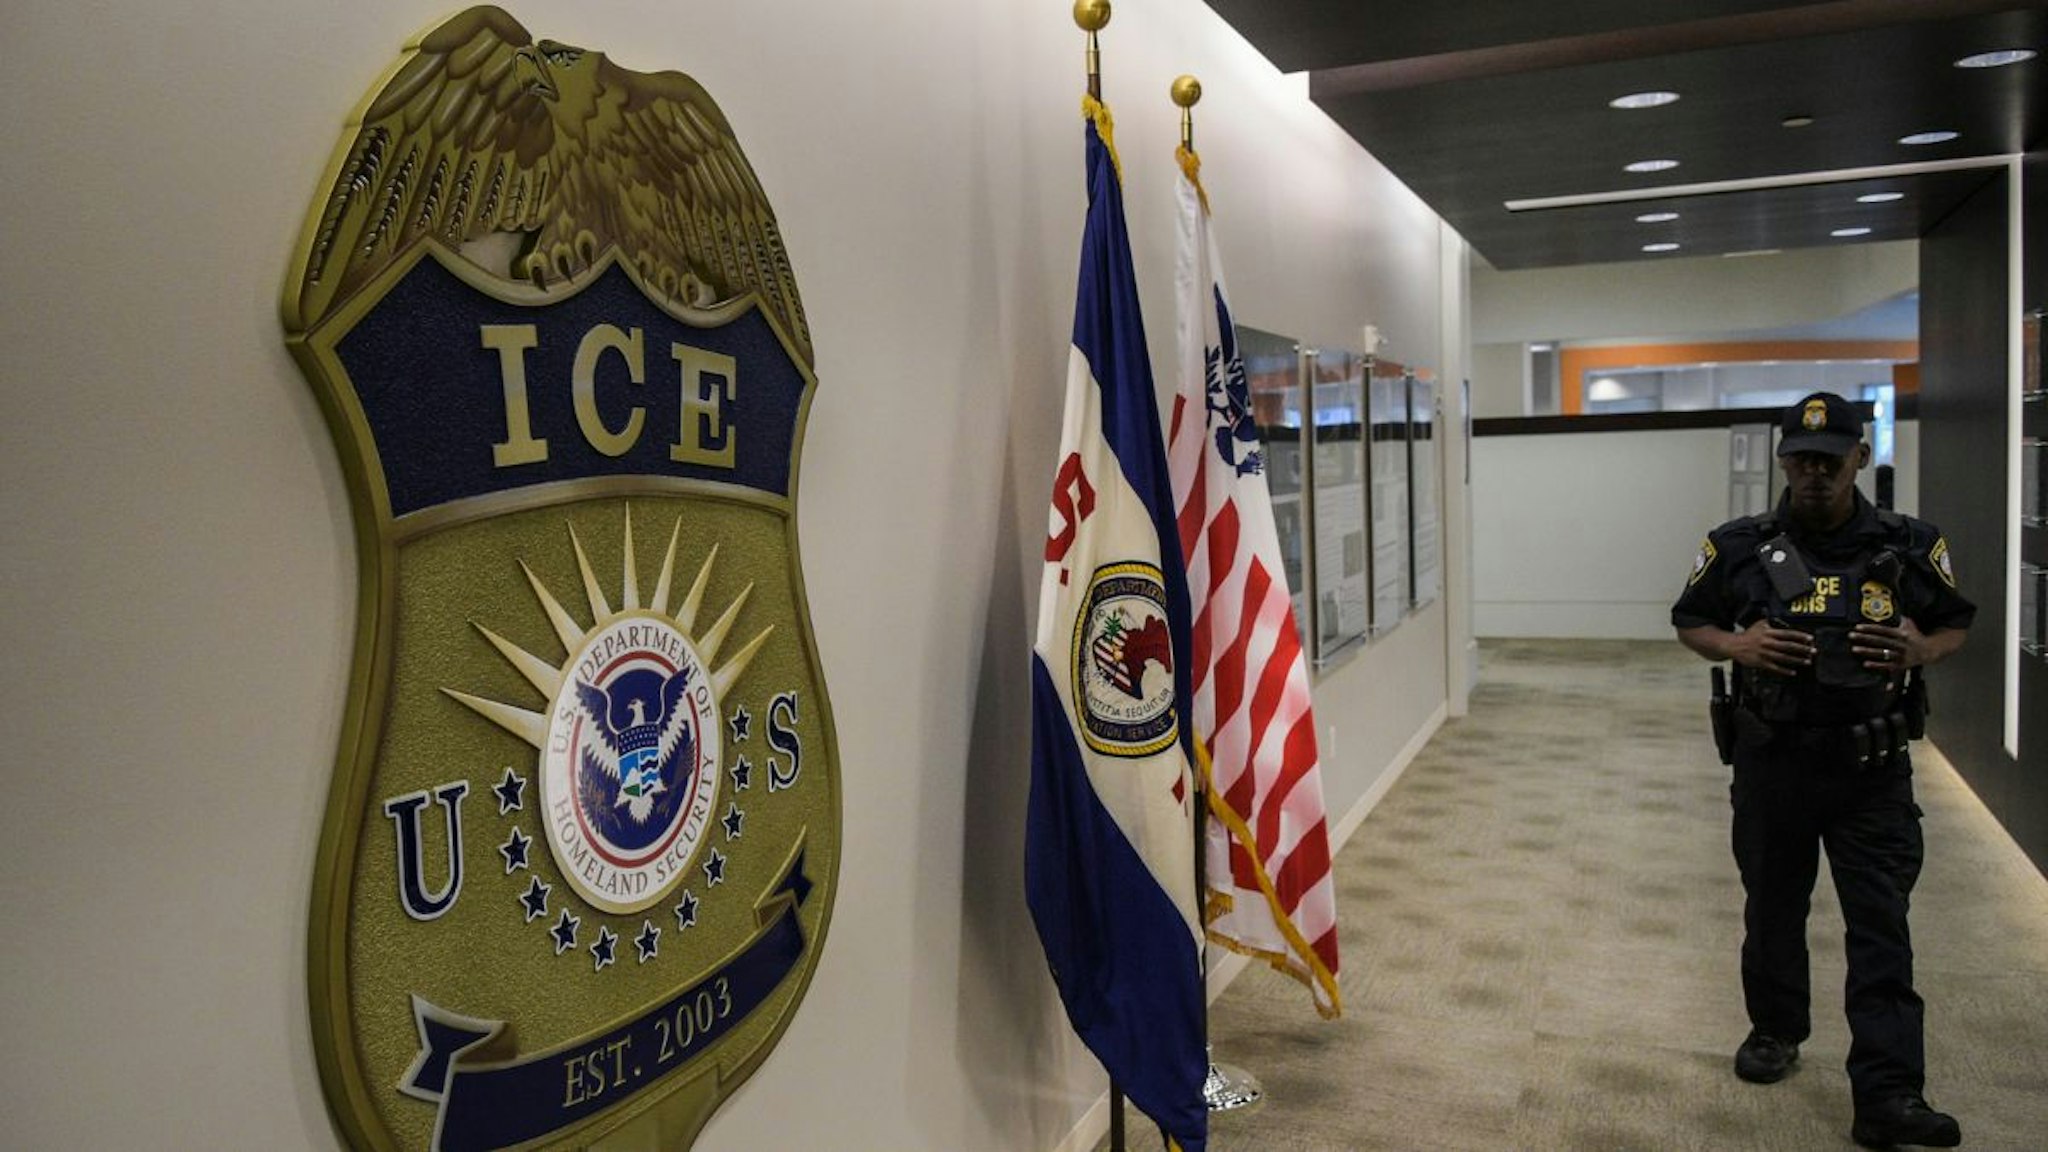 A law enforcement officer walks past ICE logo ahead of a press conference on Thursday, May 11, 2017, at the U.S. Immigration and Customs Enforcement headquarters in Washington, DC.